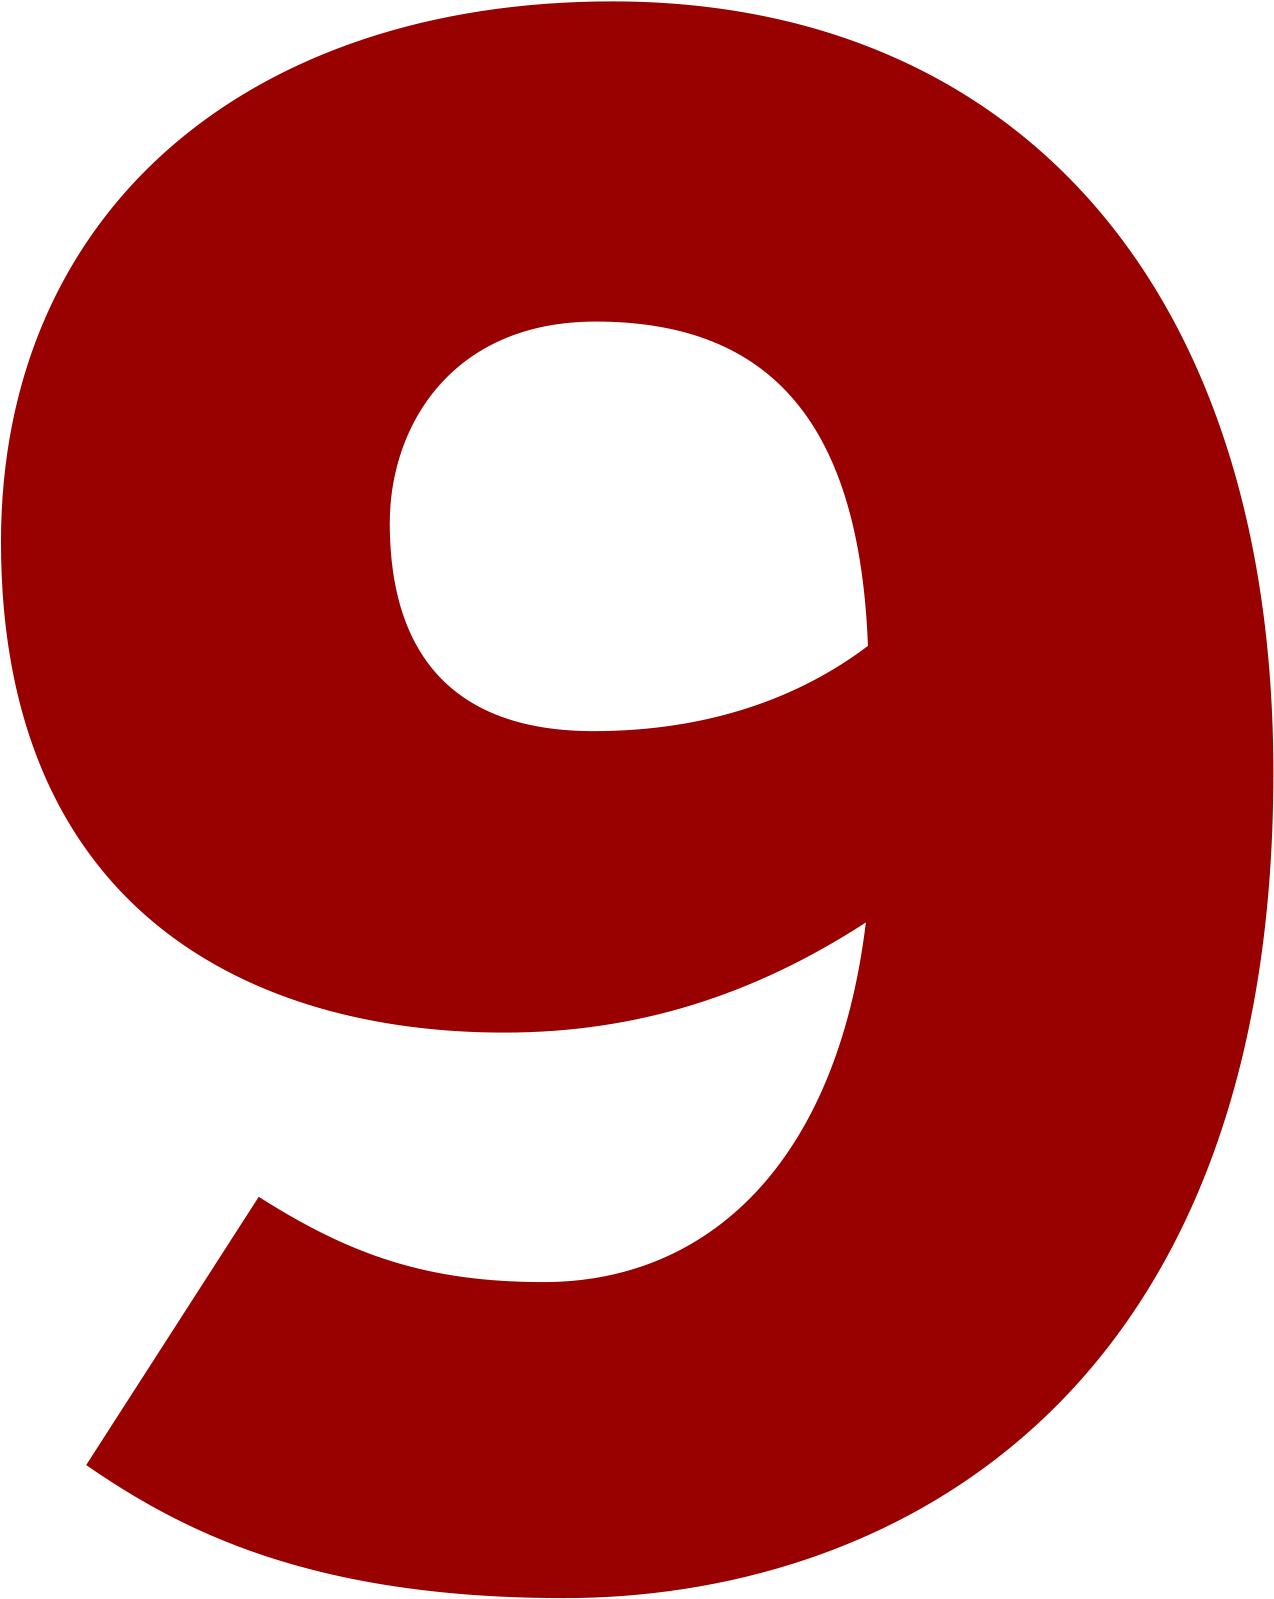 A Red Number With Black Background